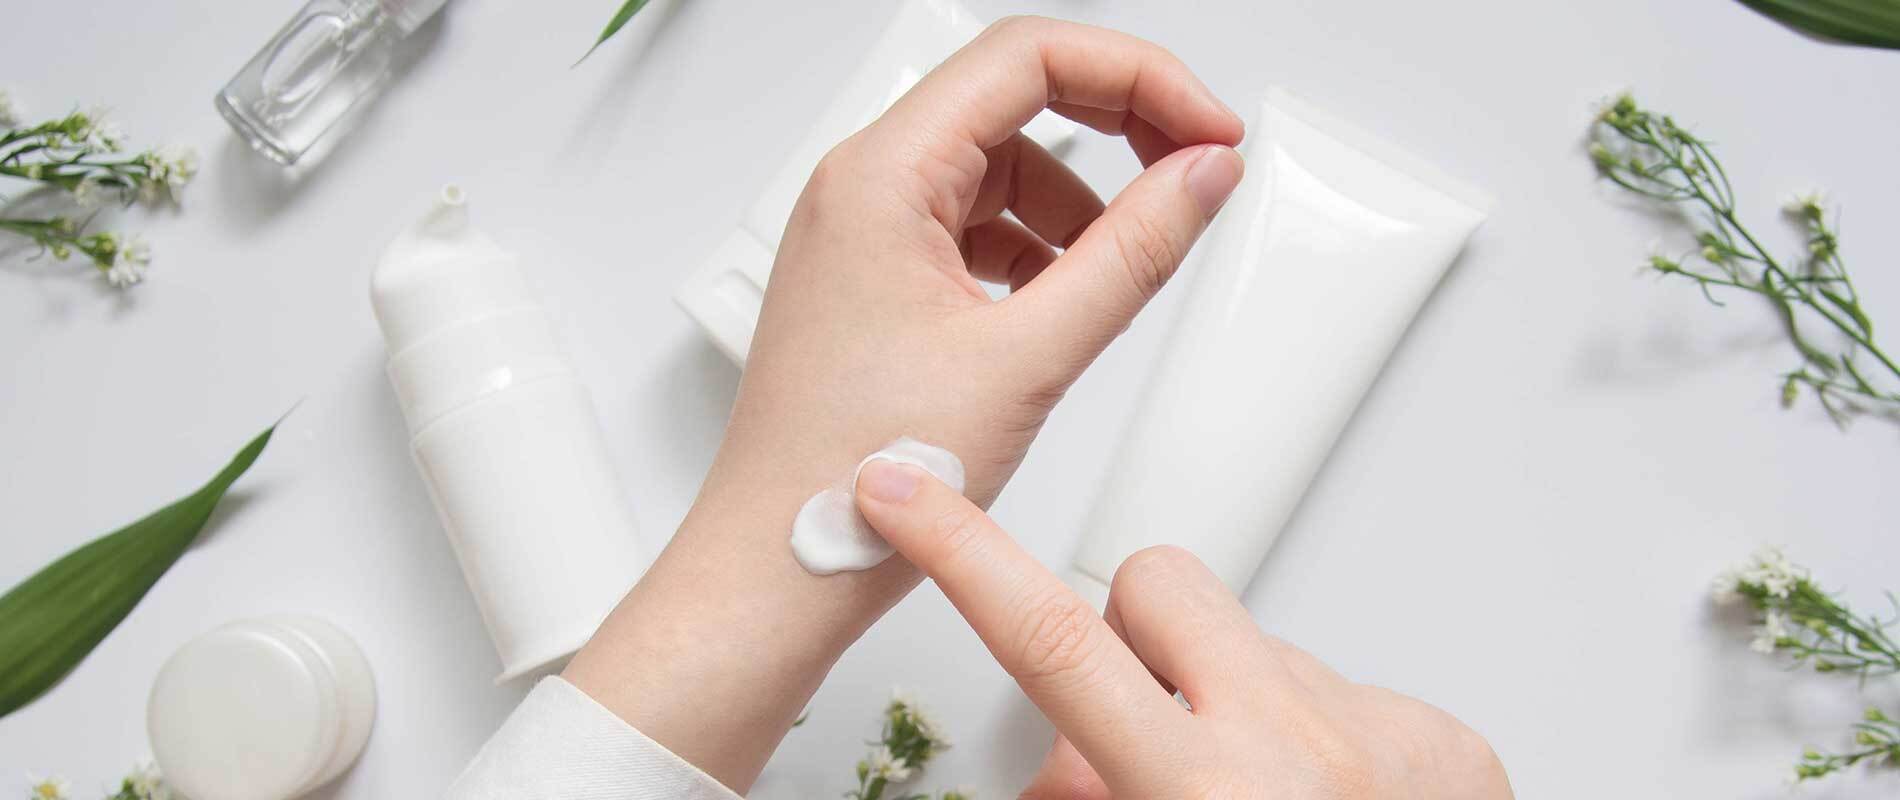 How To Do A Patch Test: Guide To Assessing Skin Compatibility